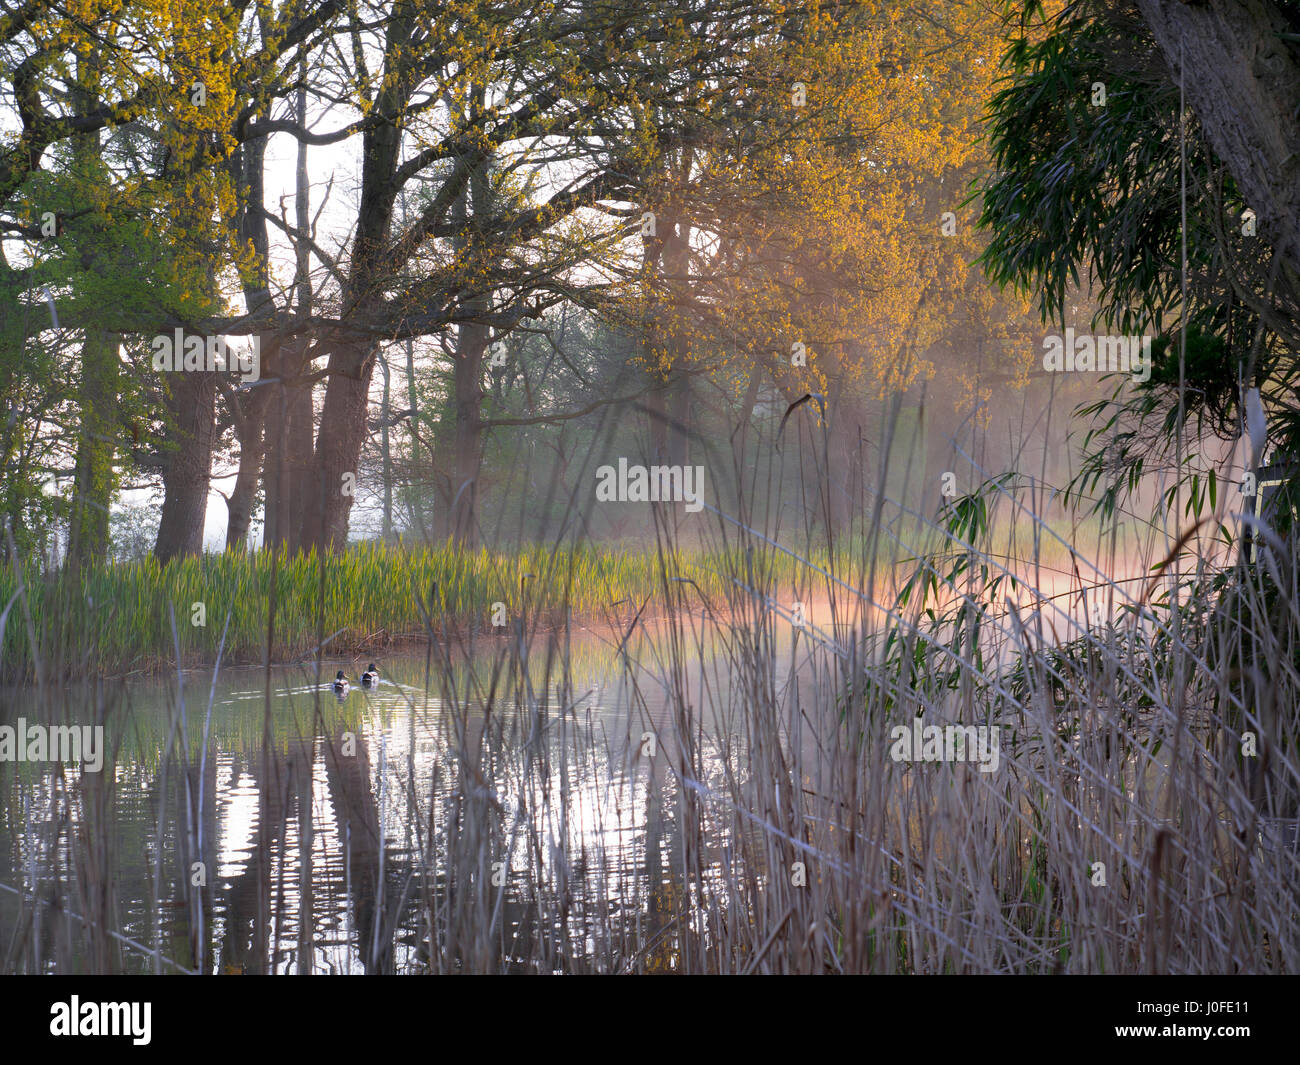 Sunrise River mist Spring morning ducks & reflections early dawn River Wey Surrey UK viewed through winter dried reeds riverside garden bank Stock Photo